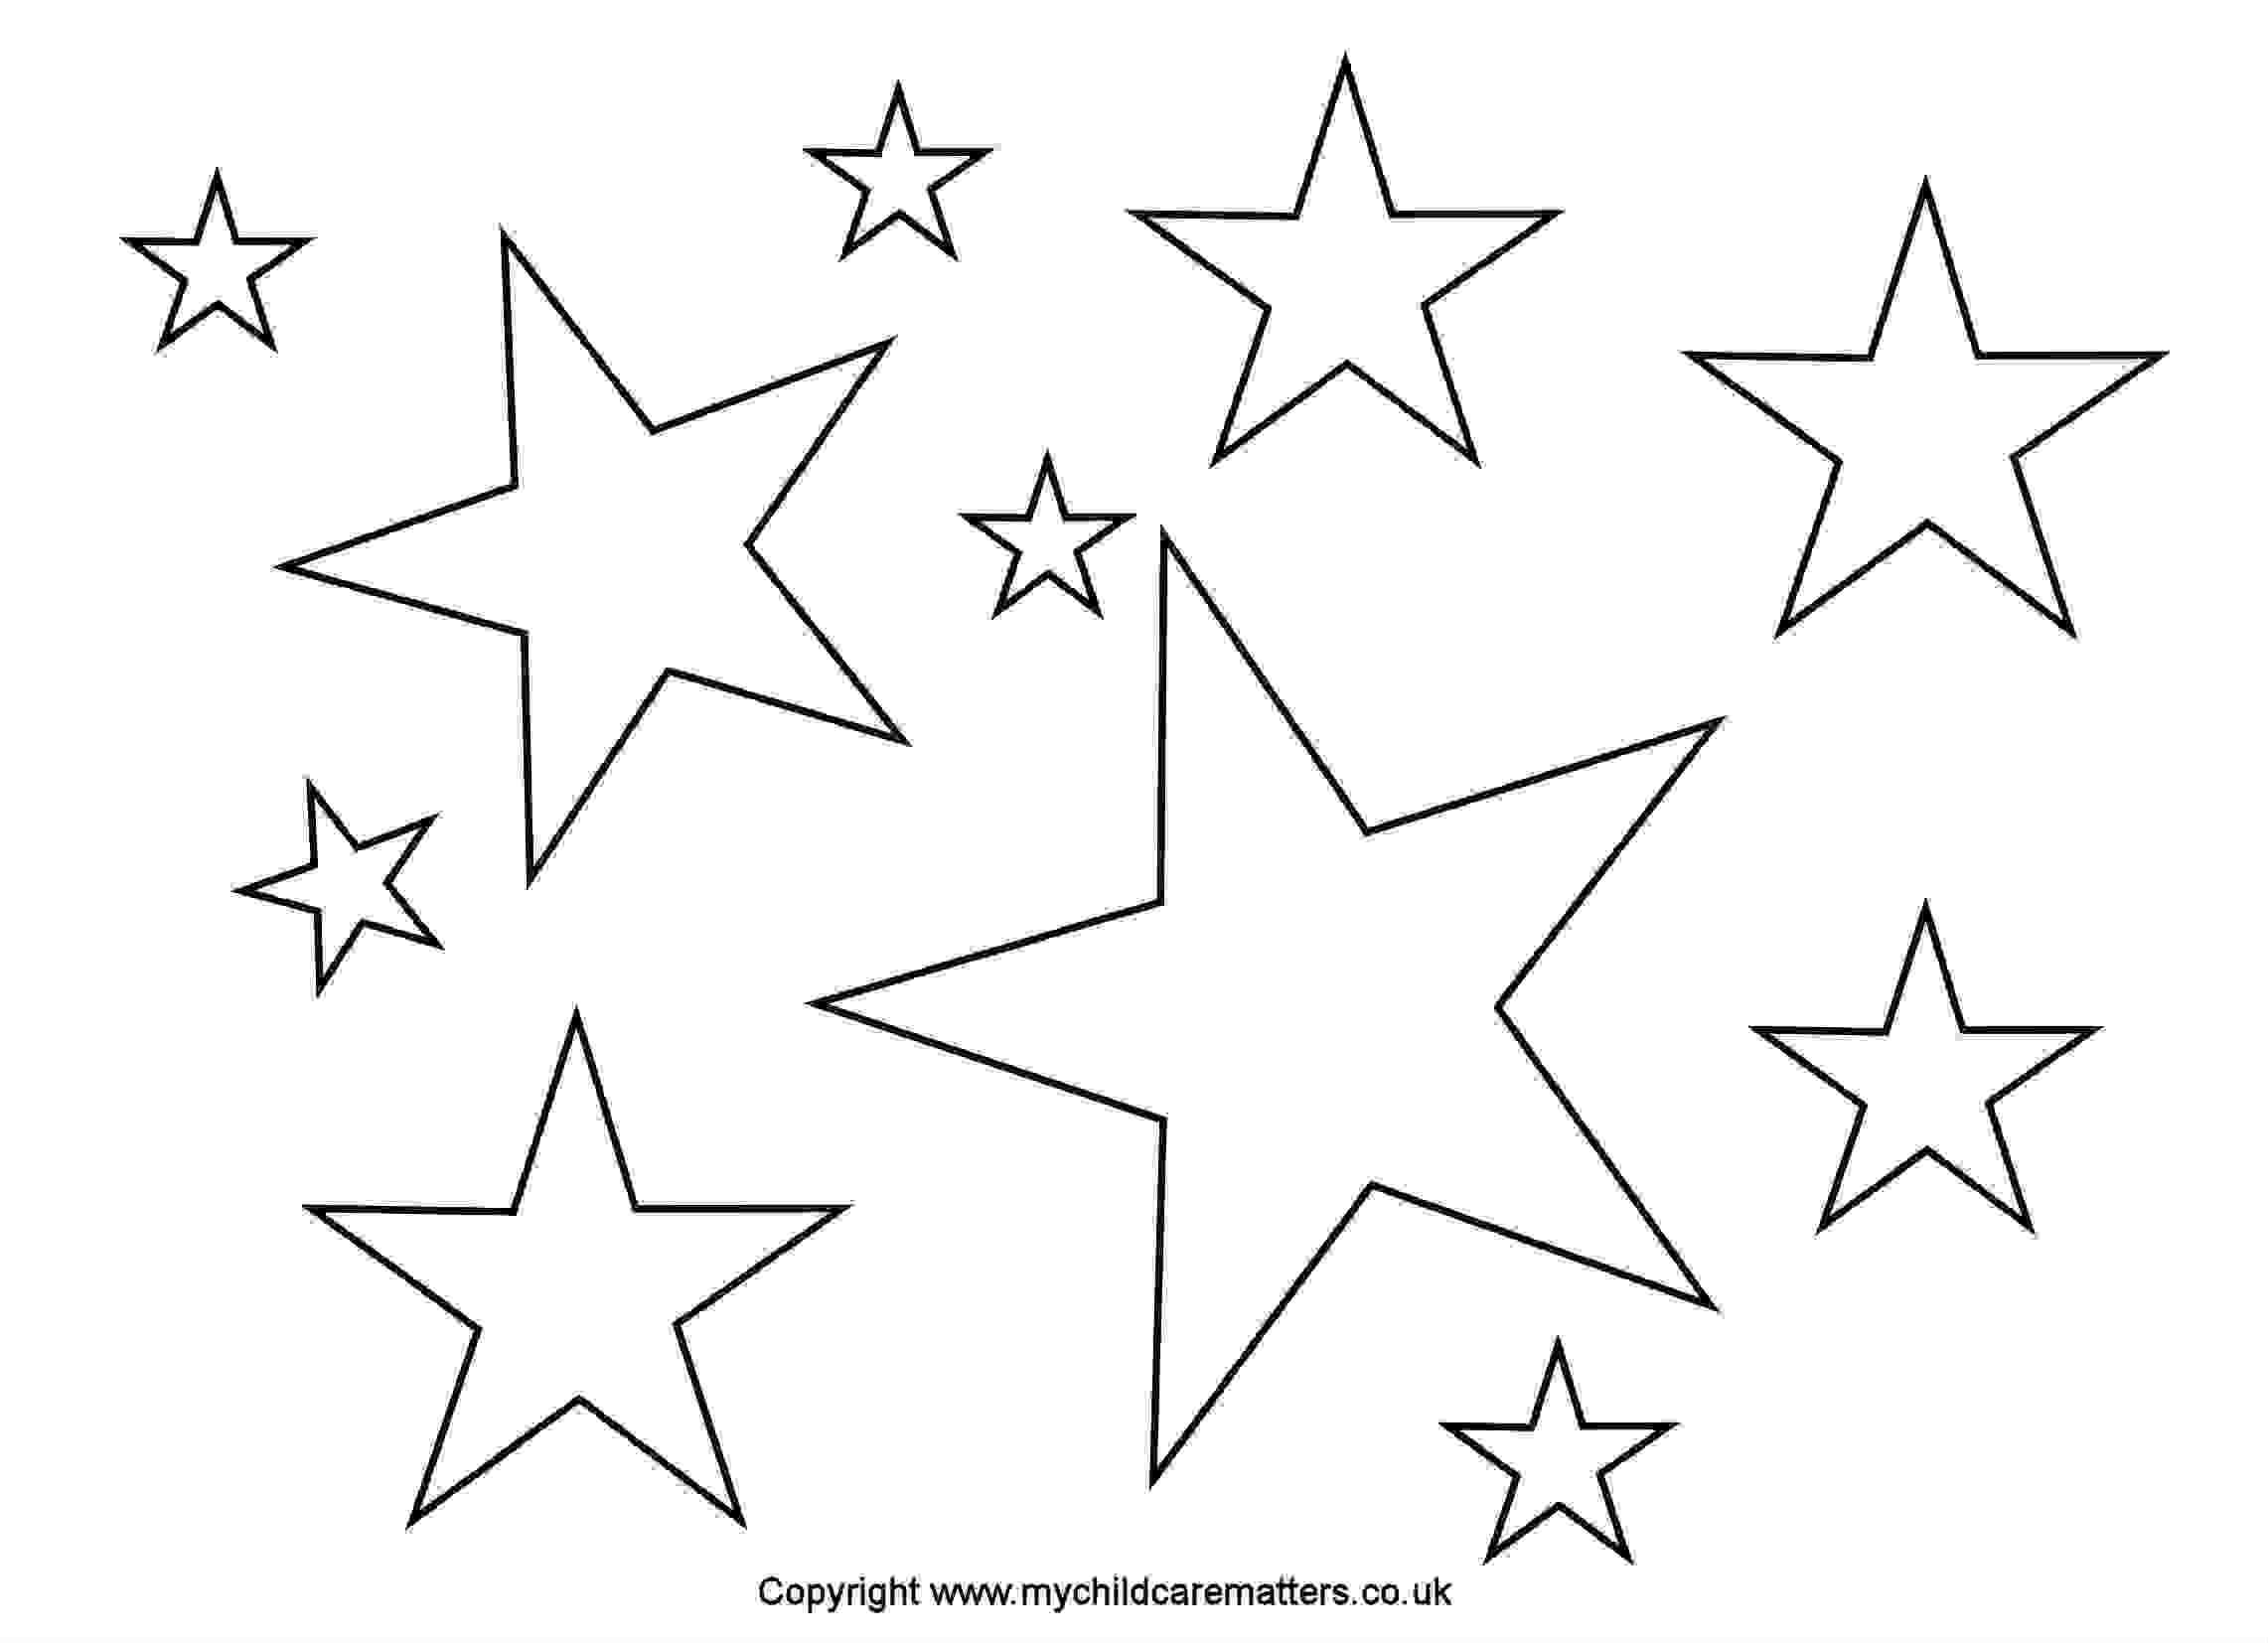 Star outline images stars outline greeting cards black background and some ppt template clipart